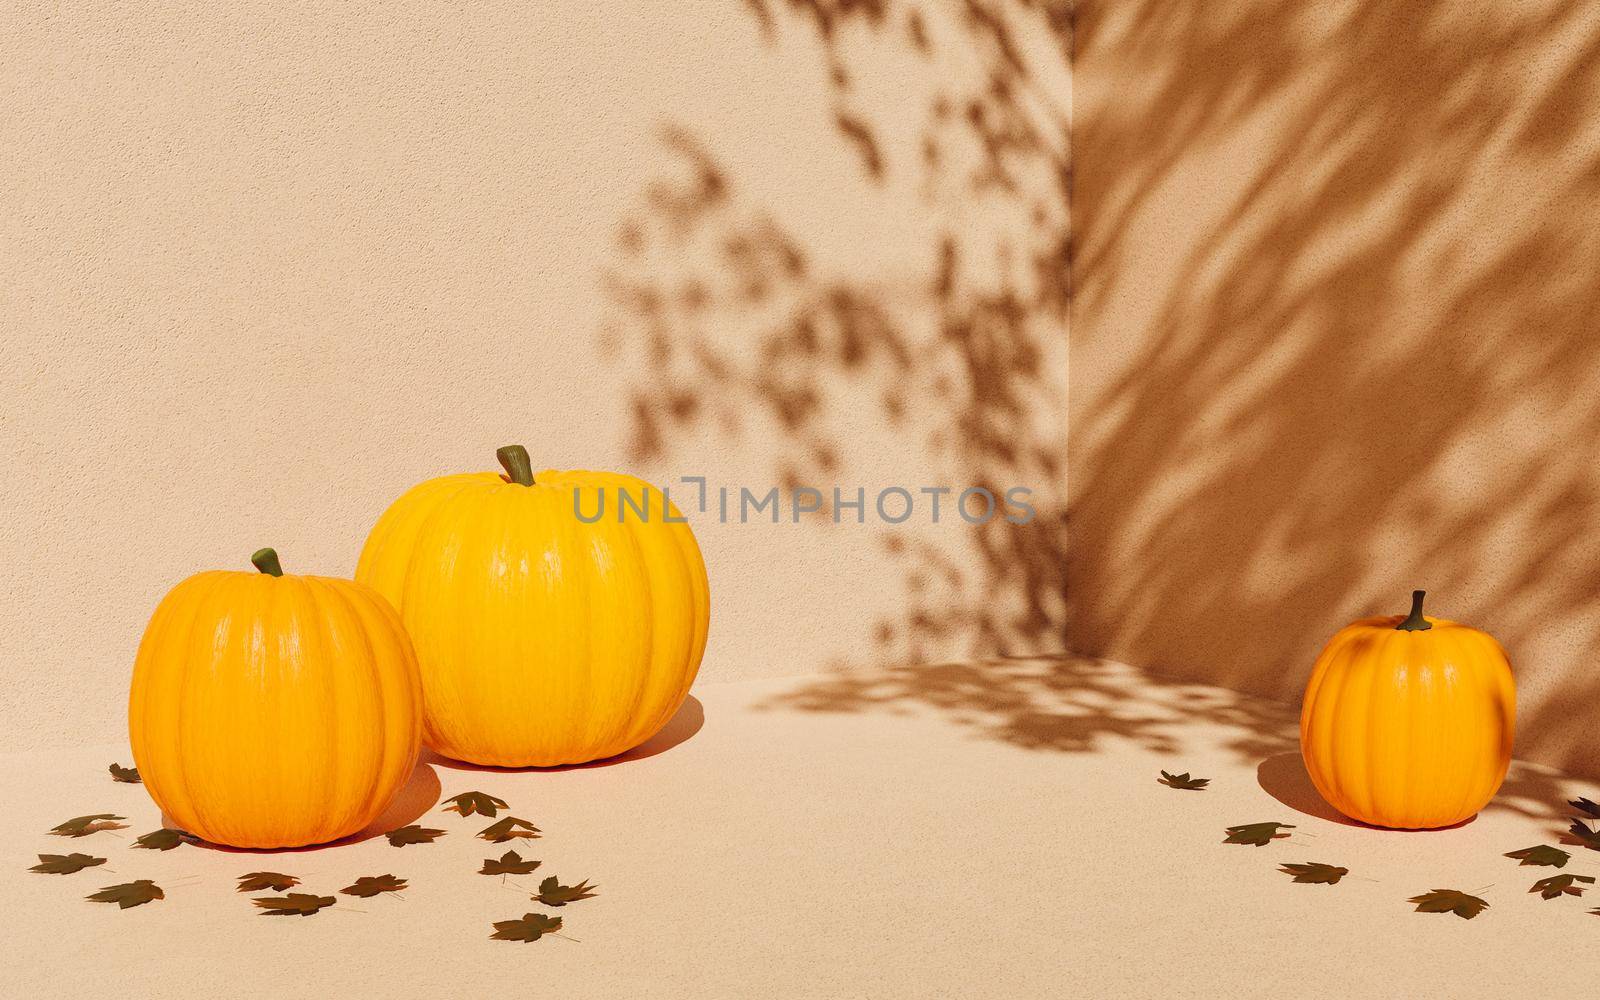 corner with tree shade and pumpkins for product display. autumn scene. 3d rendering